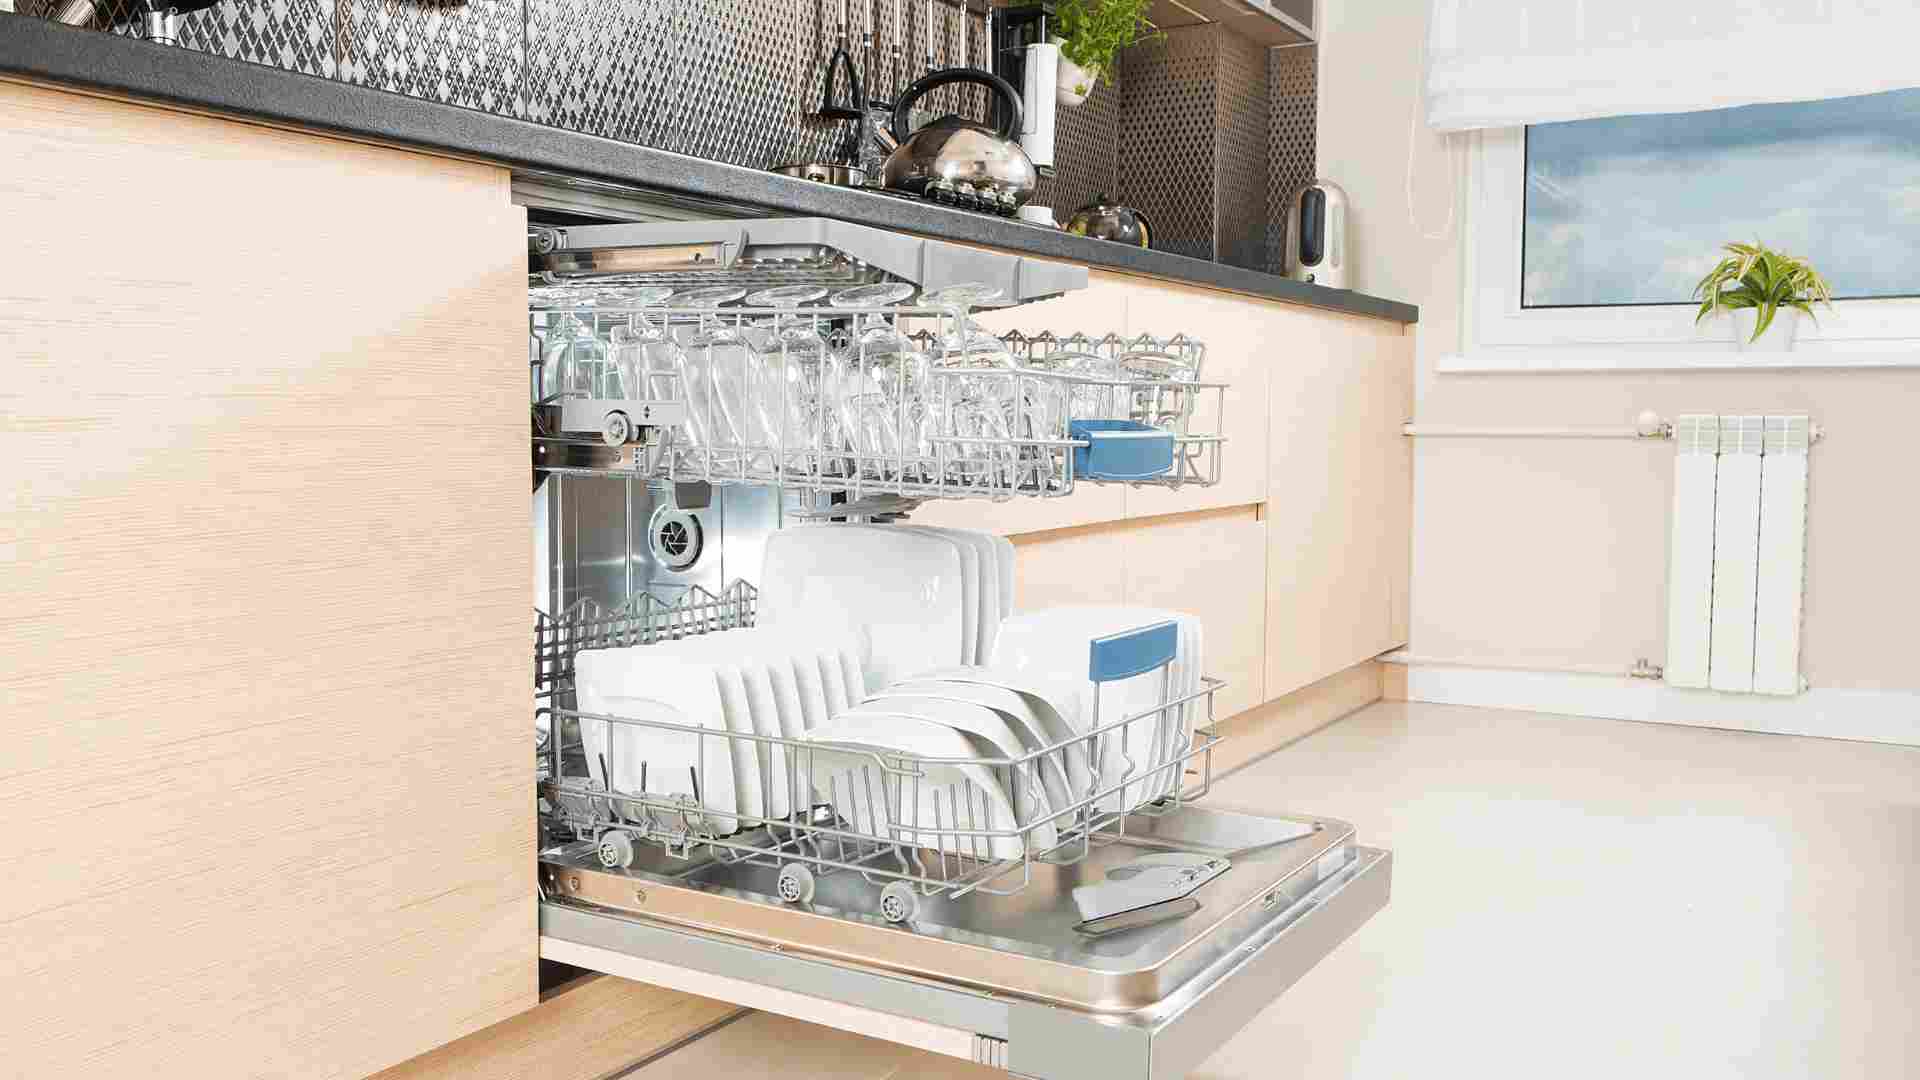 Can-you-turn-off-dishwasher-mid-cycle-featured-image